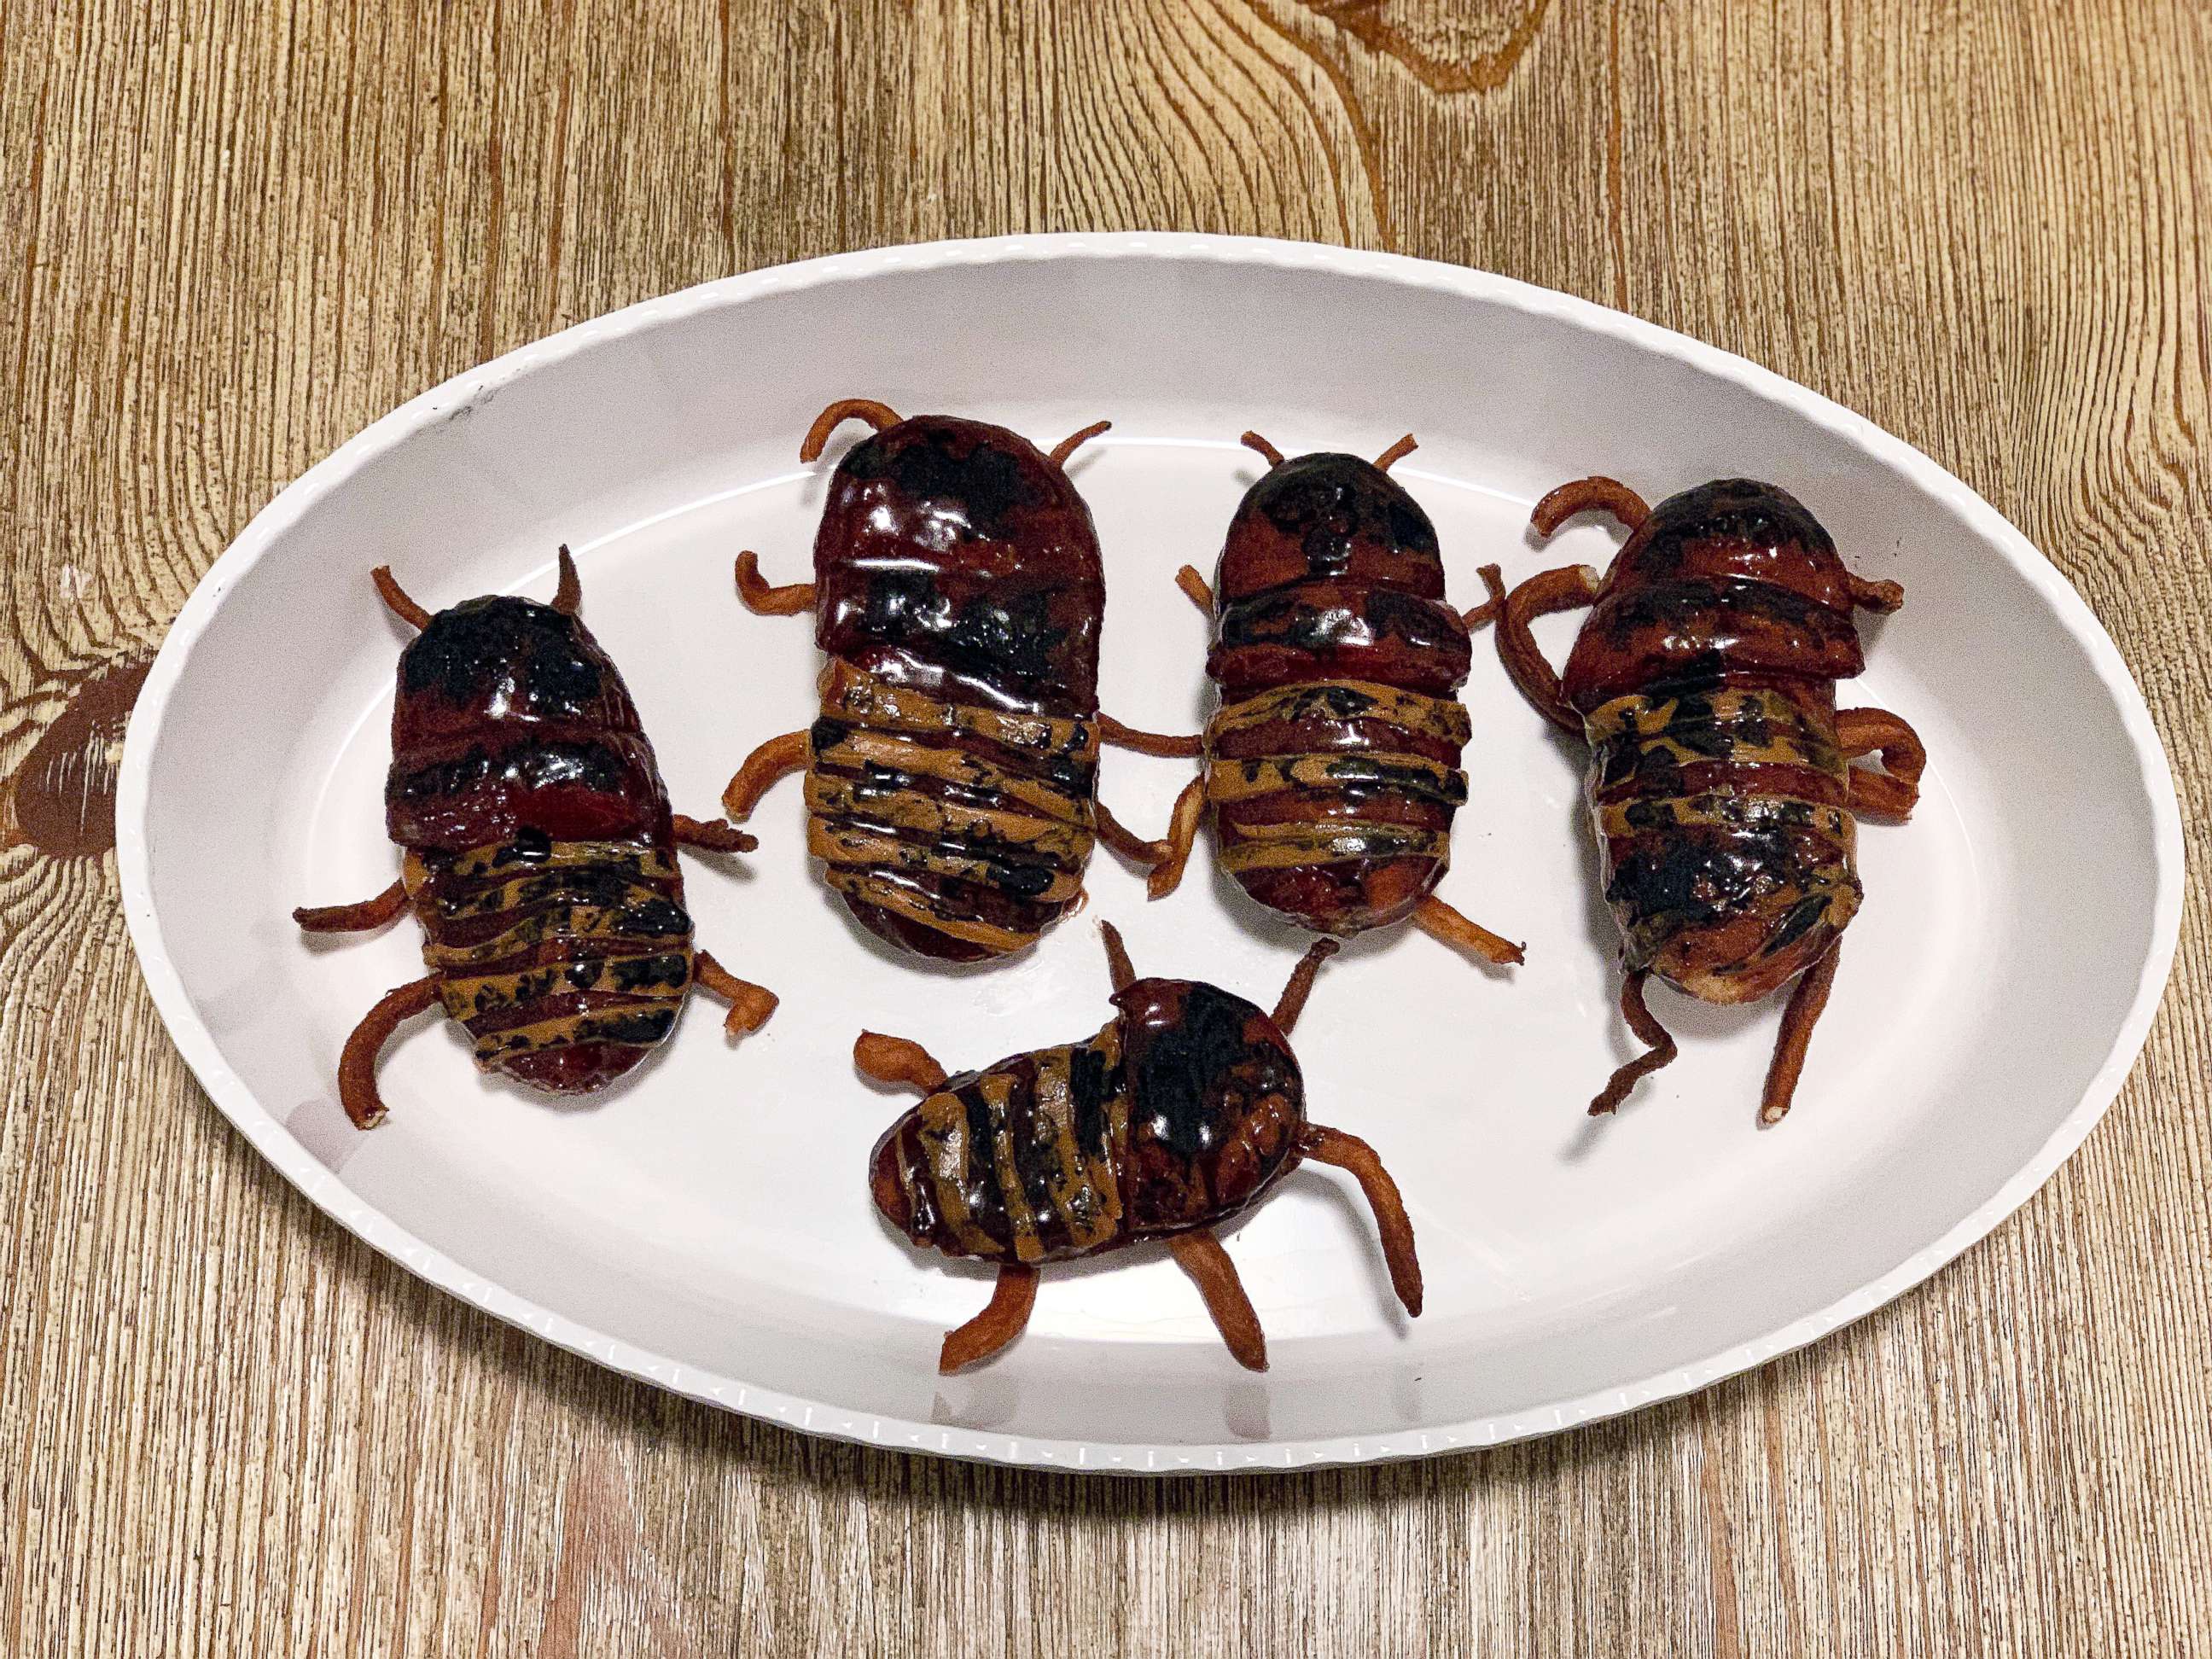 PHOTO: I made Pinterest's top 10 Halloween recipes of 2019, which included Boston cream donuts that look like cockroaches.